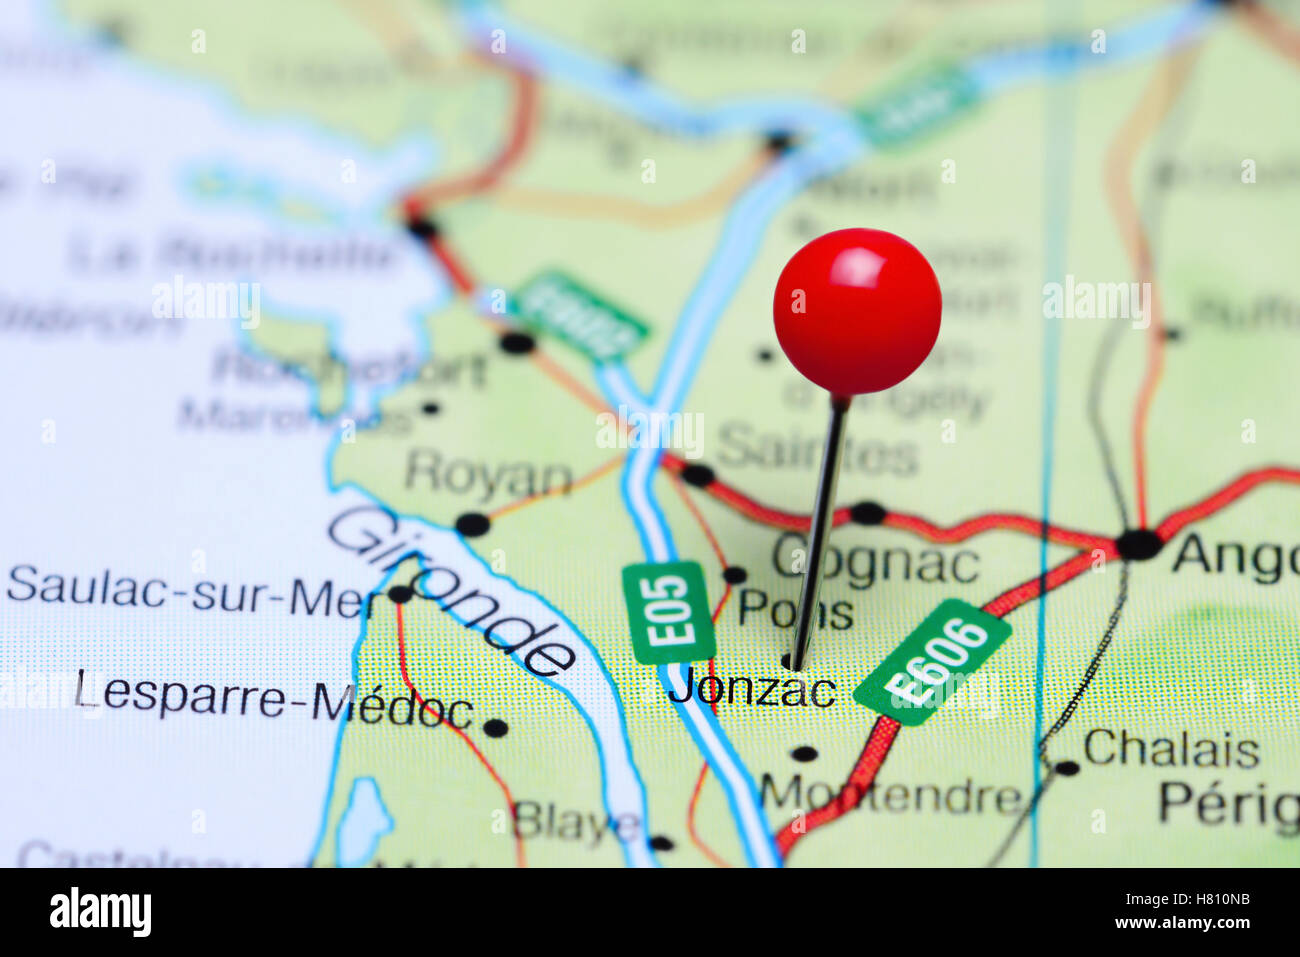 Jonzac pinned on a map of France Stock Photo - Alamy